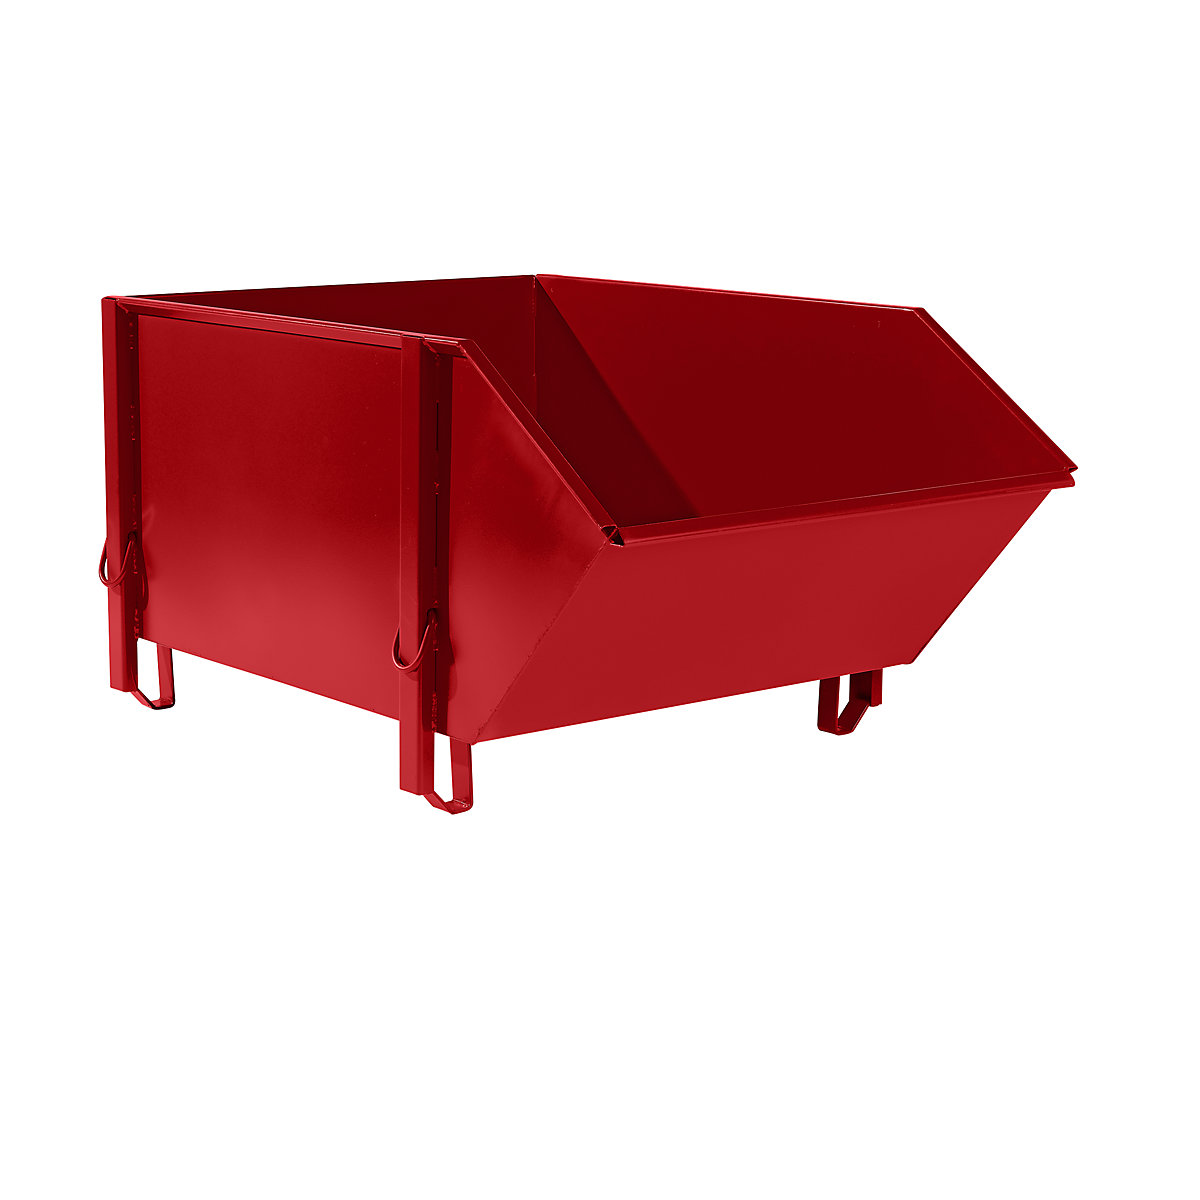 Sheet steel container – eurokraft pro, capacity 1 m³, without folding chute, flame red-7